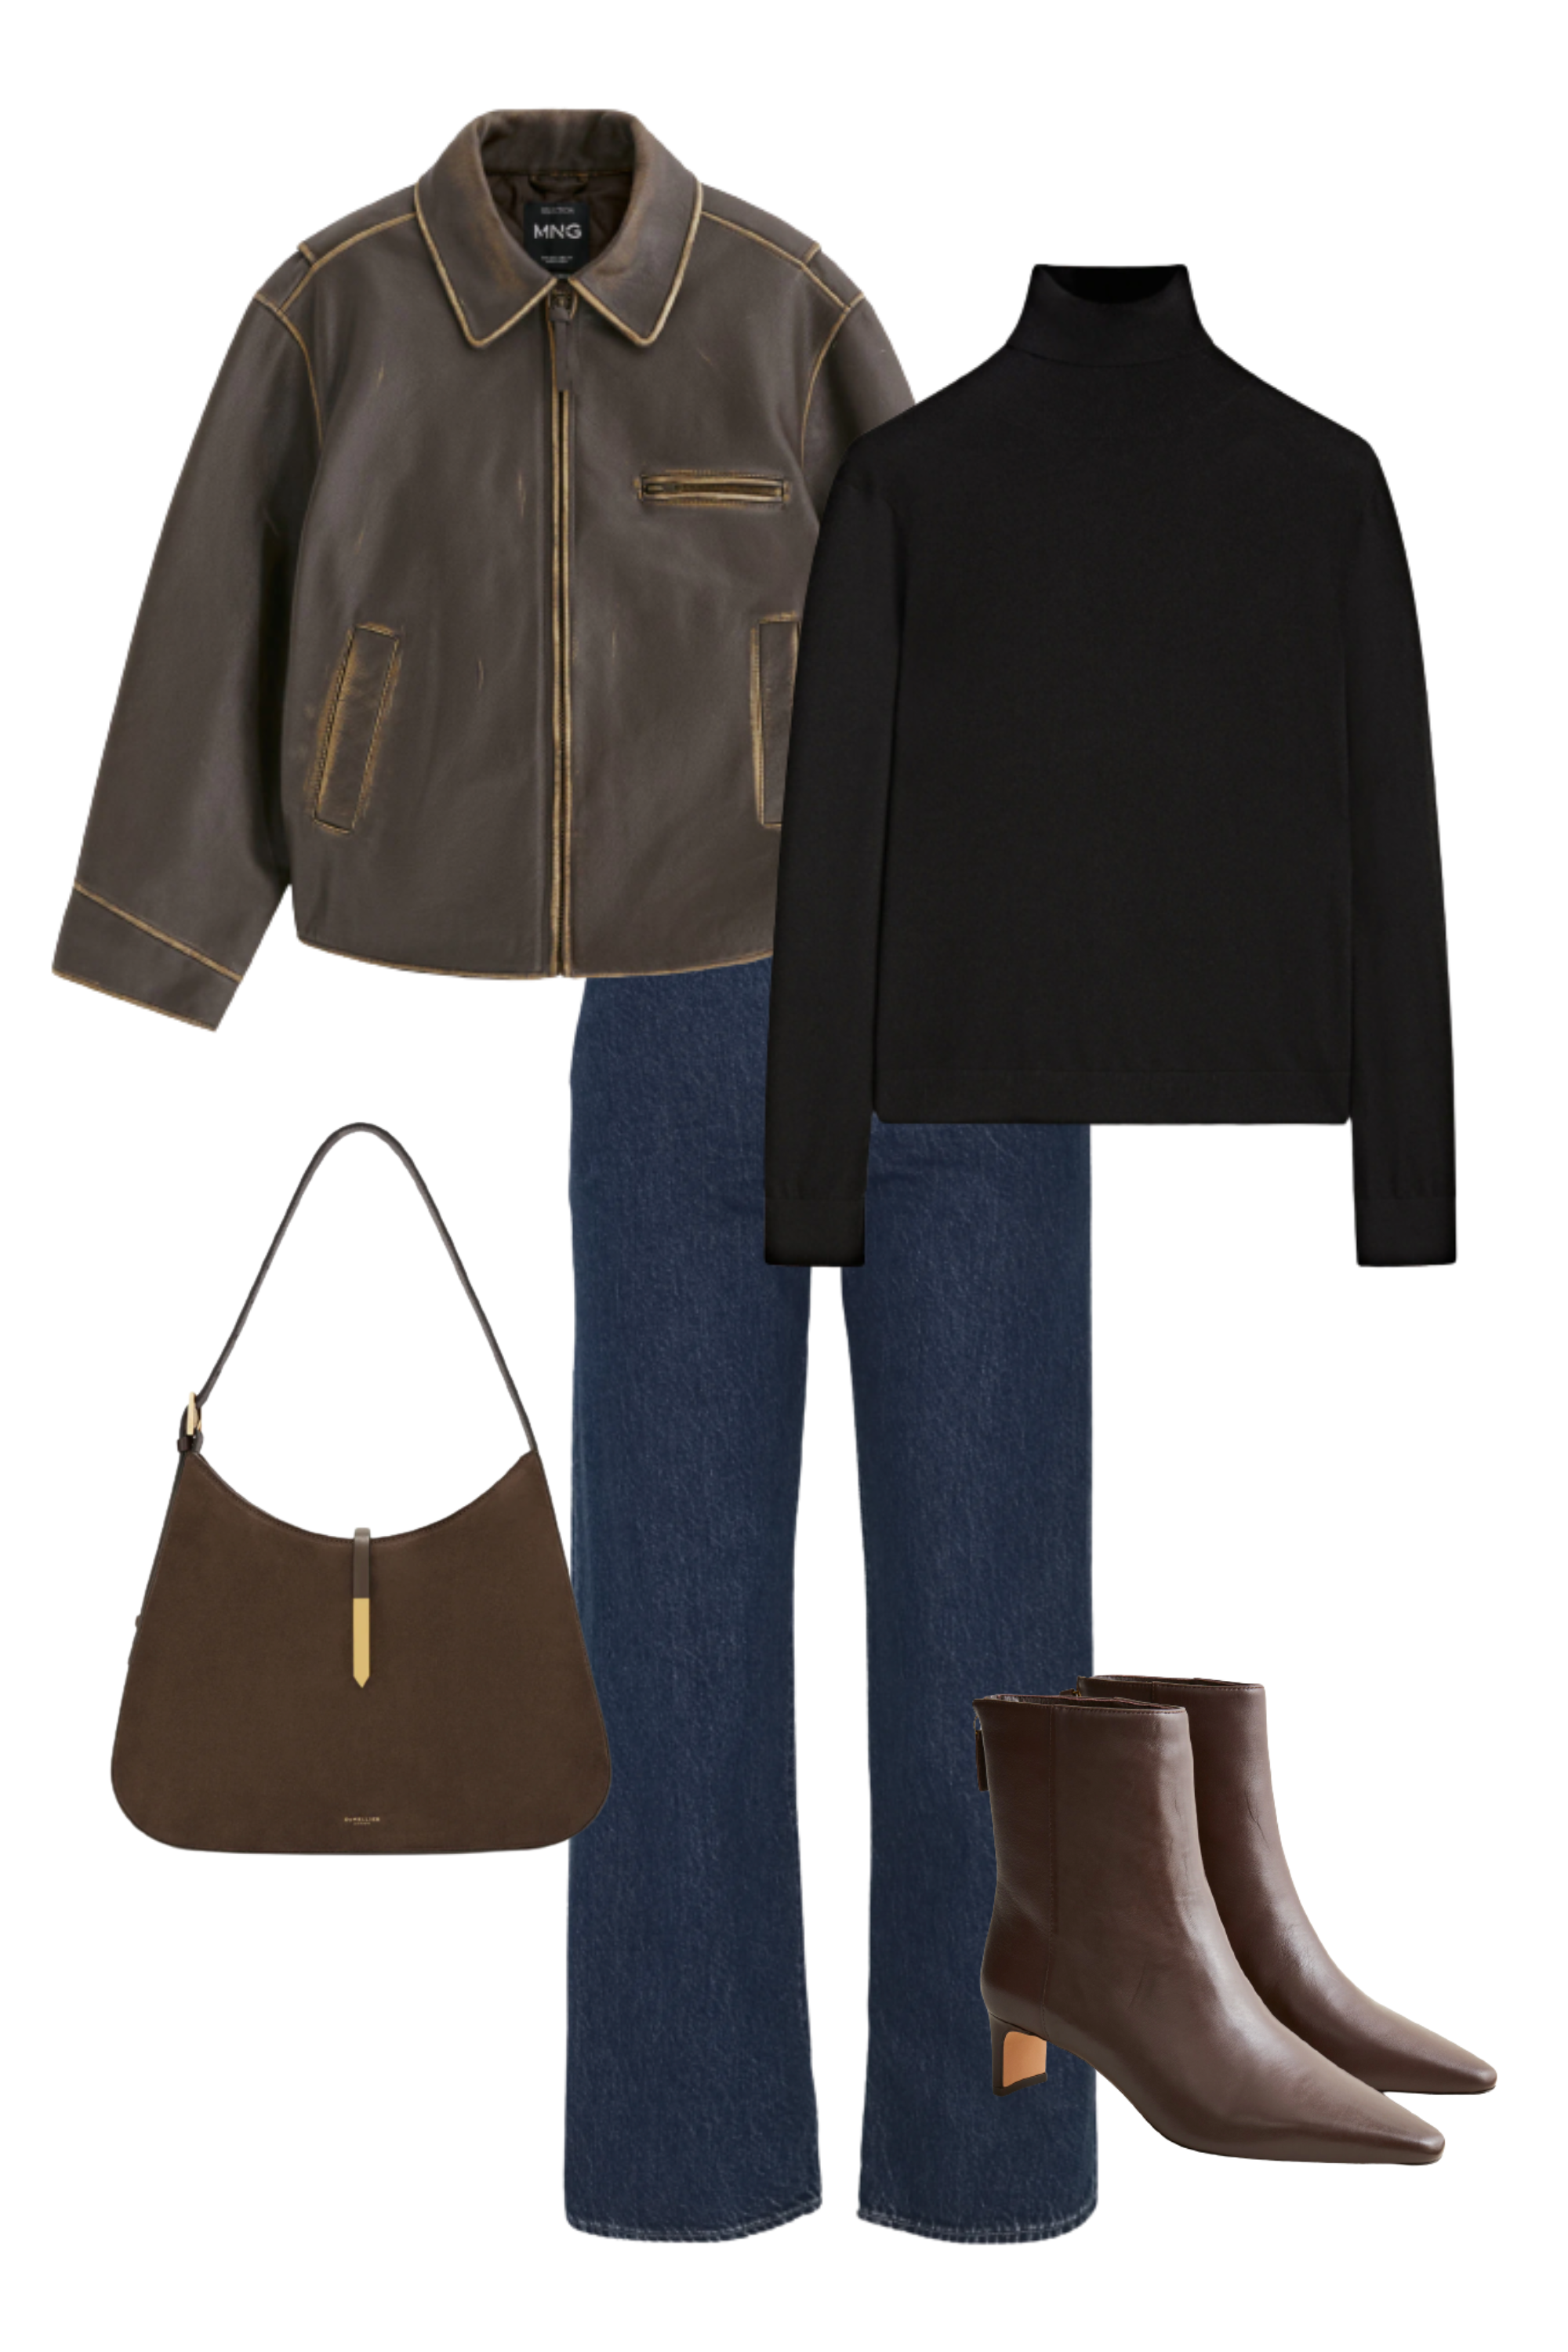 7 Fall Date Night Outfits that Exude Autumnal Romance